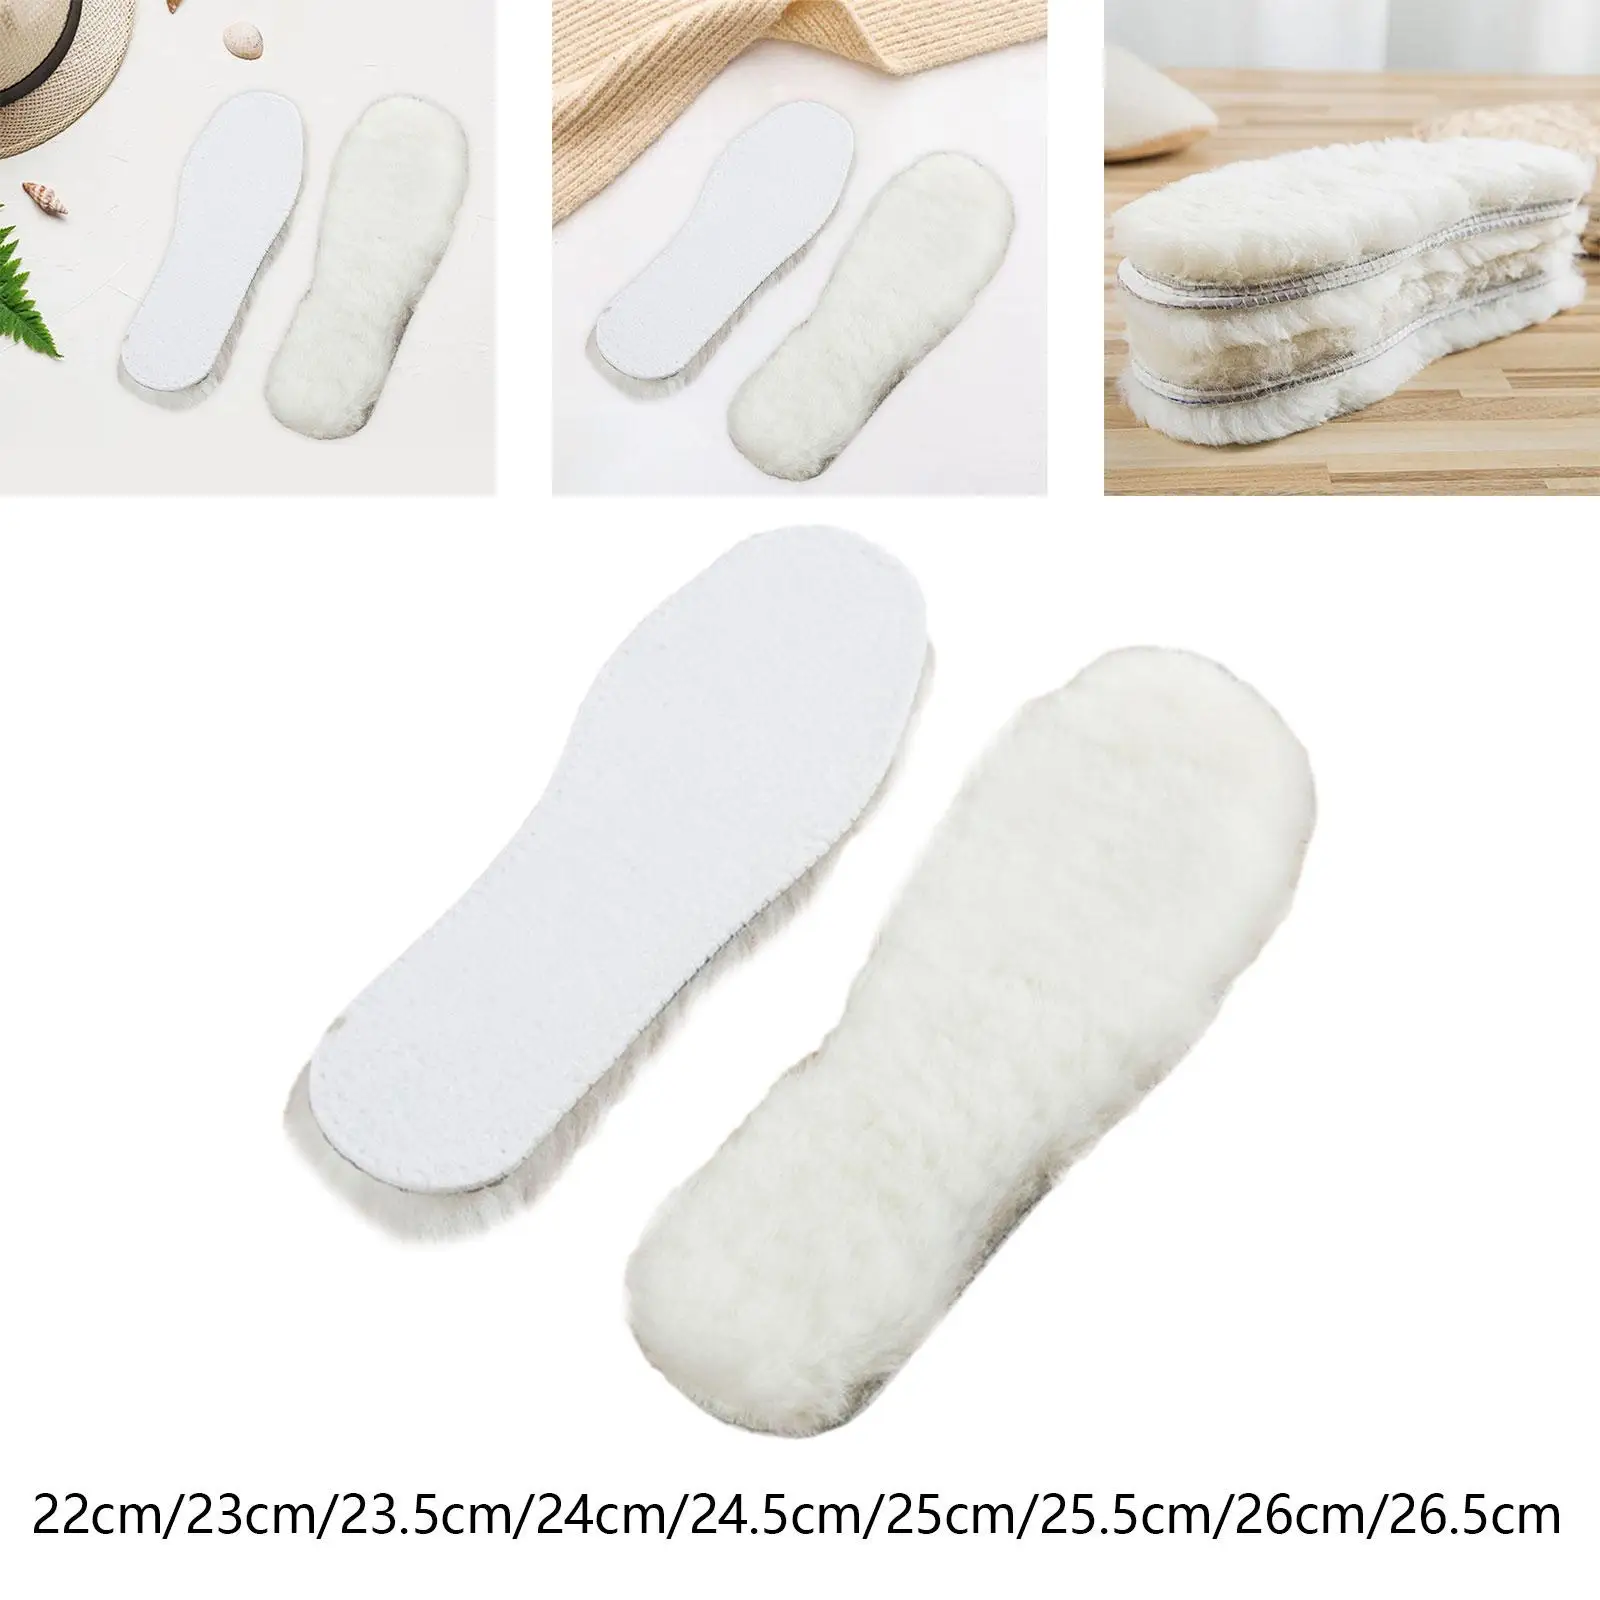 Wool Insoles Thick Inner Soles Thermal Comfortable for Women Men Premium Fleece Insoles for Boots Slippers Shoes Outdoor Sports